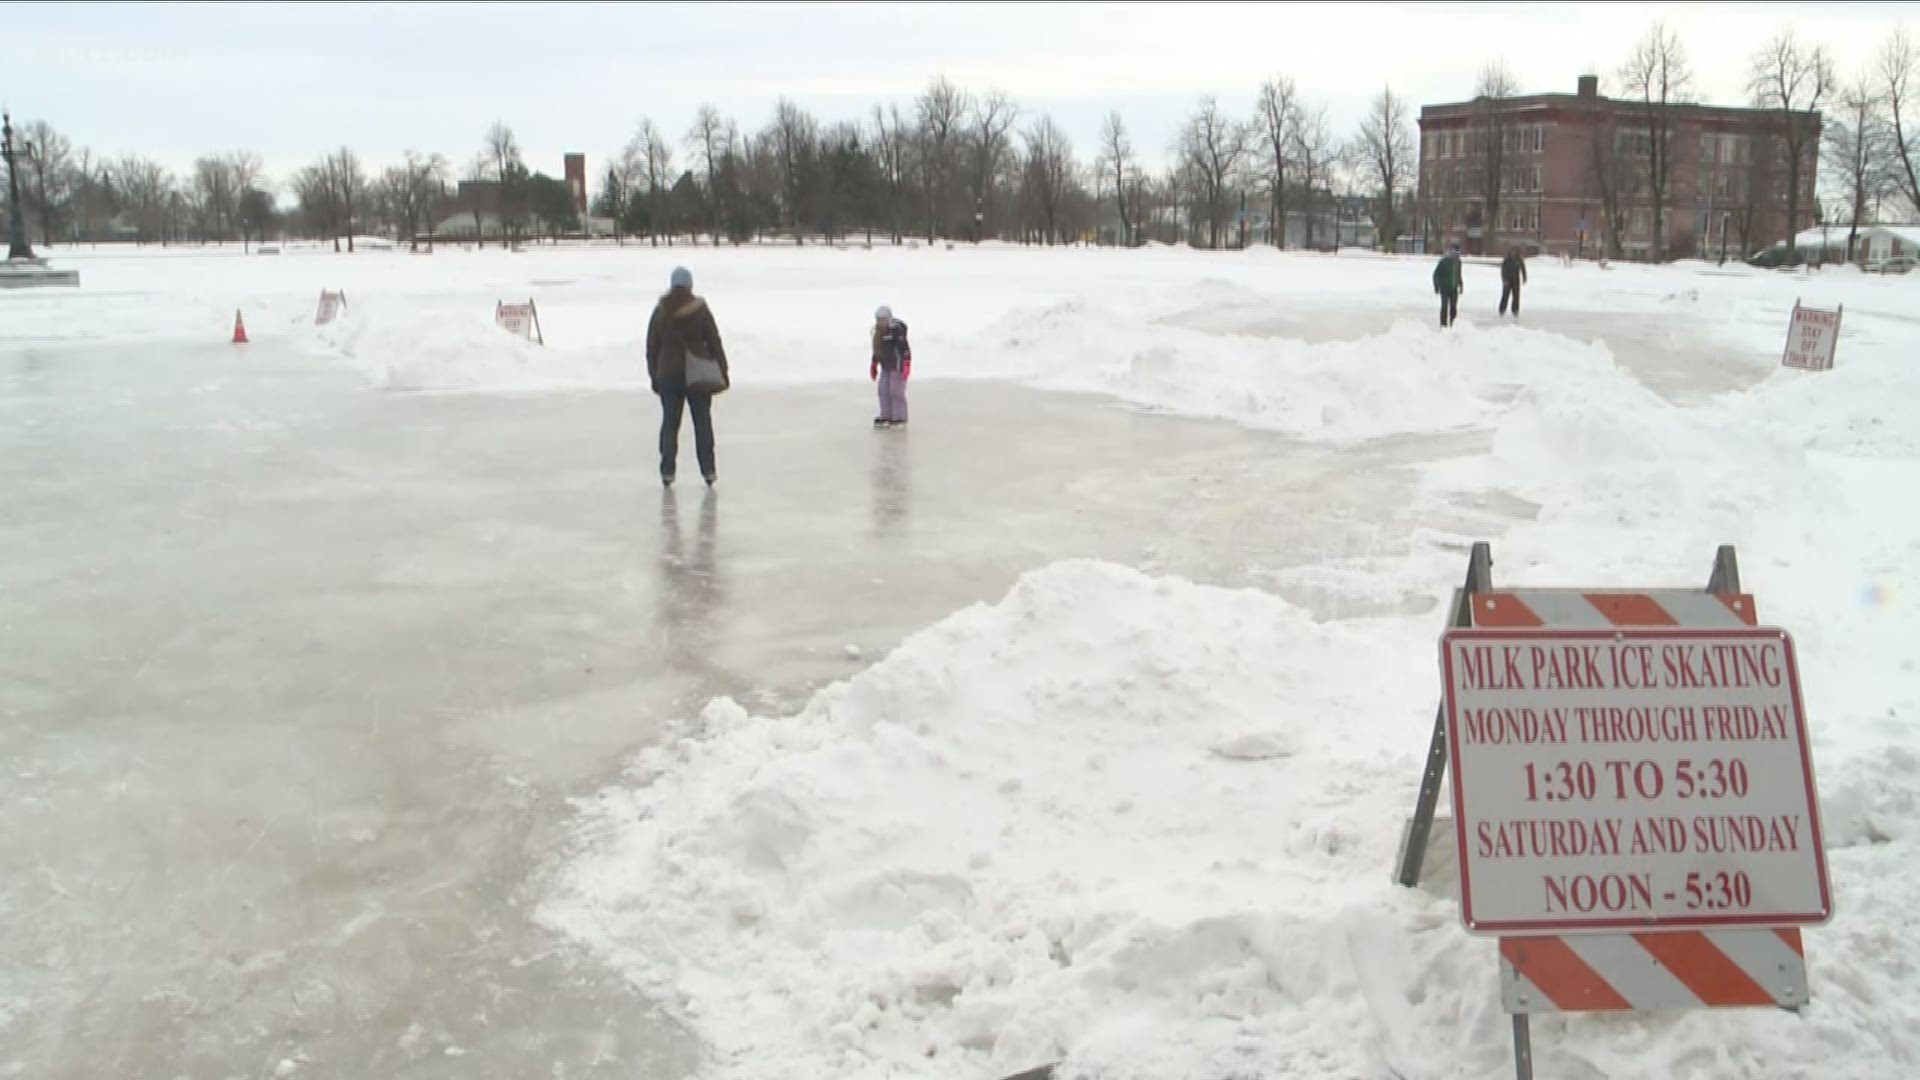 Daybreak's Karys Belger gives a preview of what people can expect at this year's Winter Blast at MLK Park.